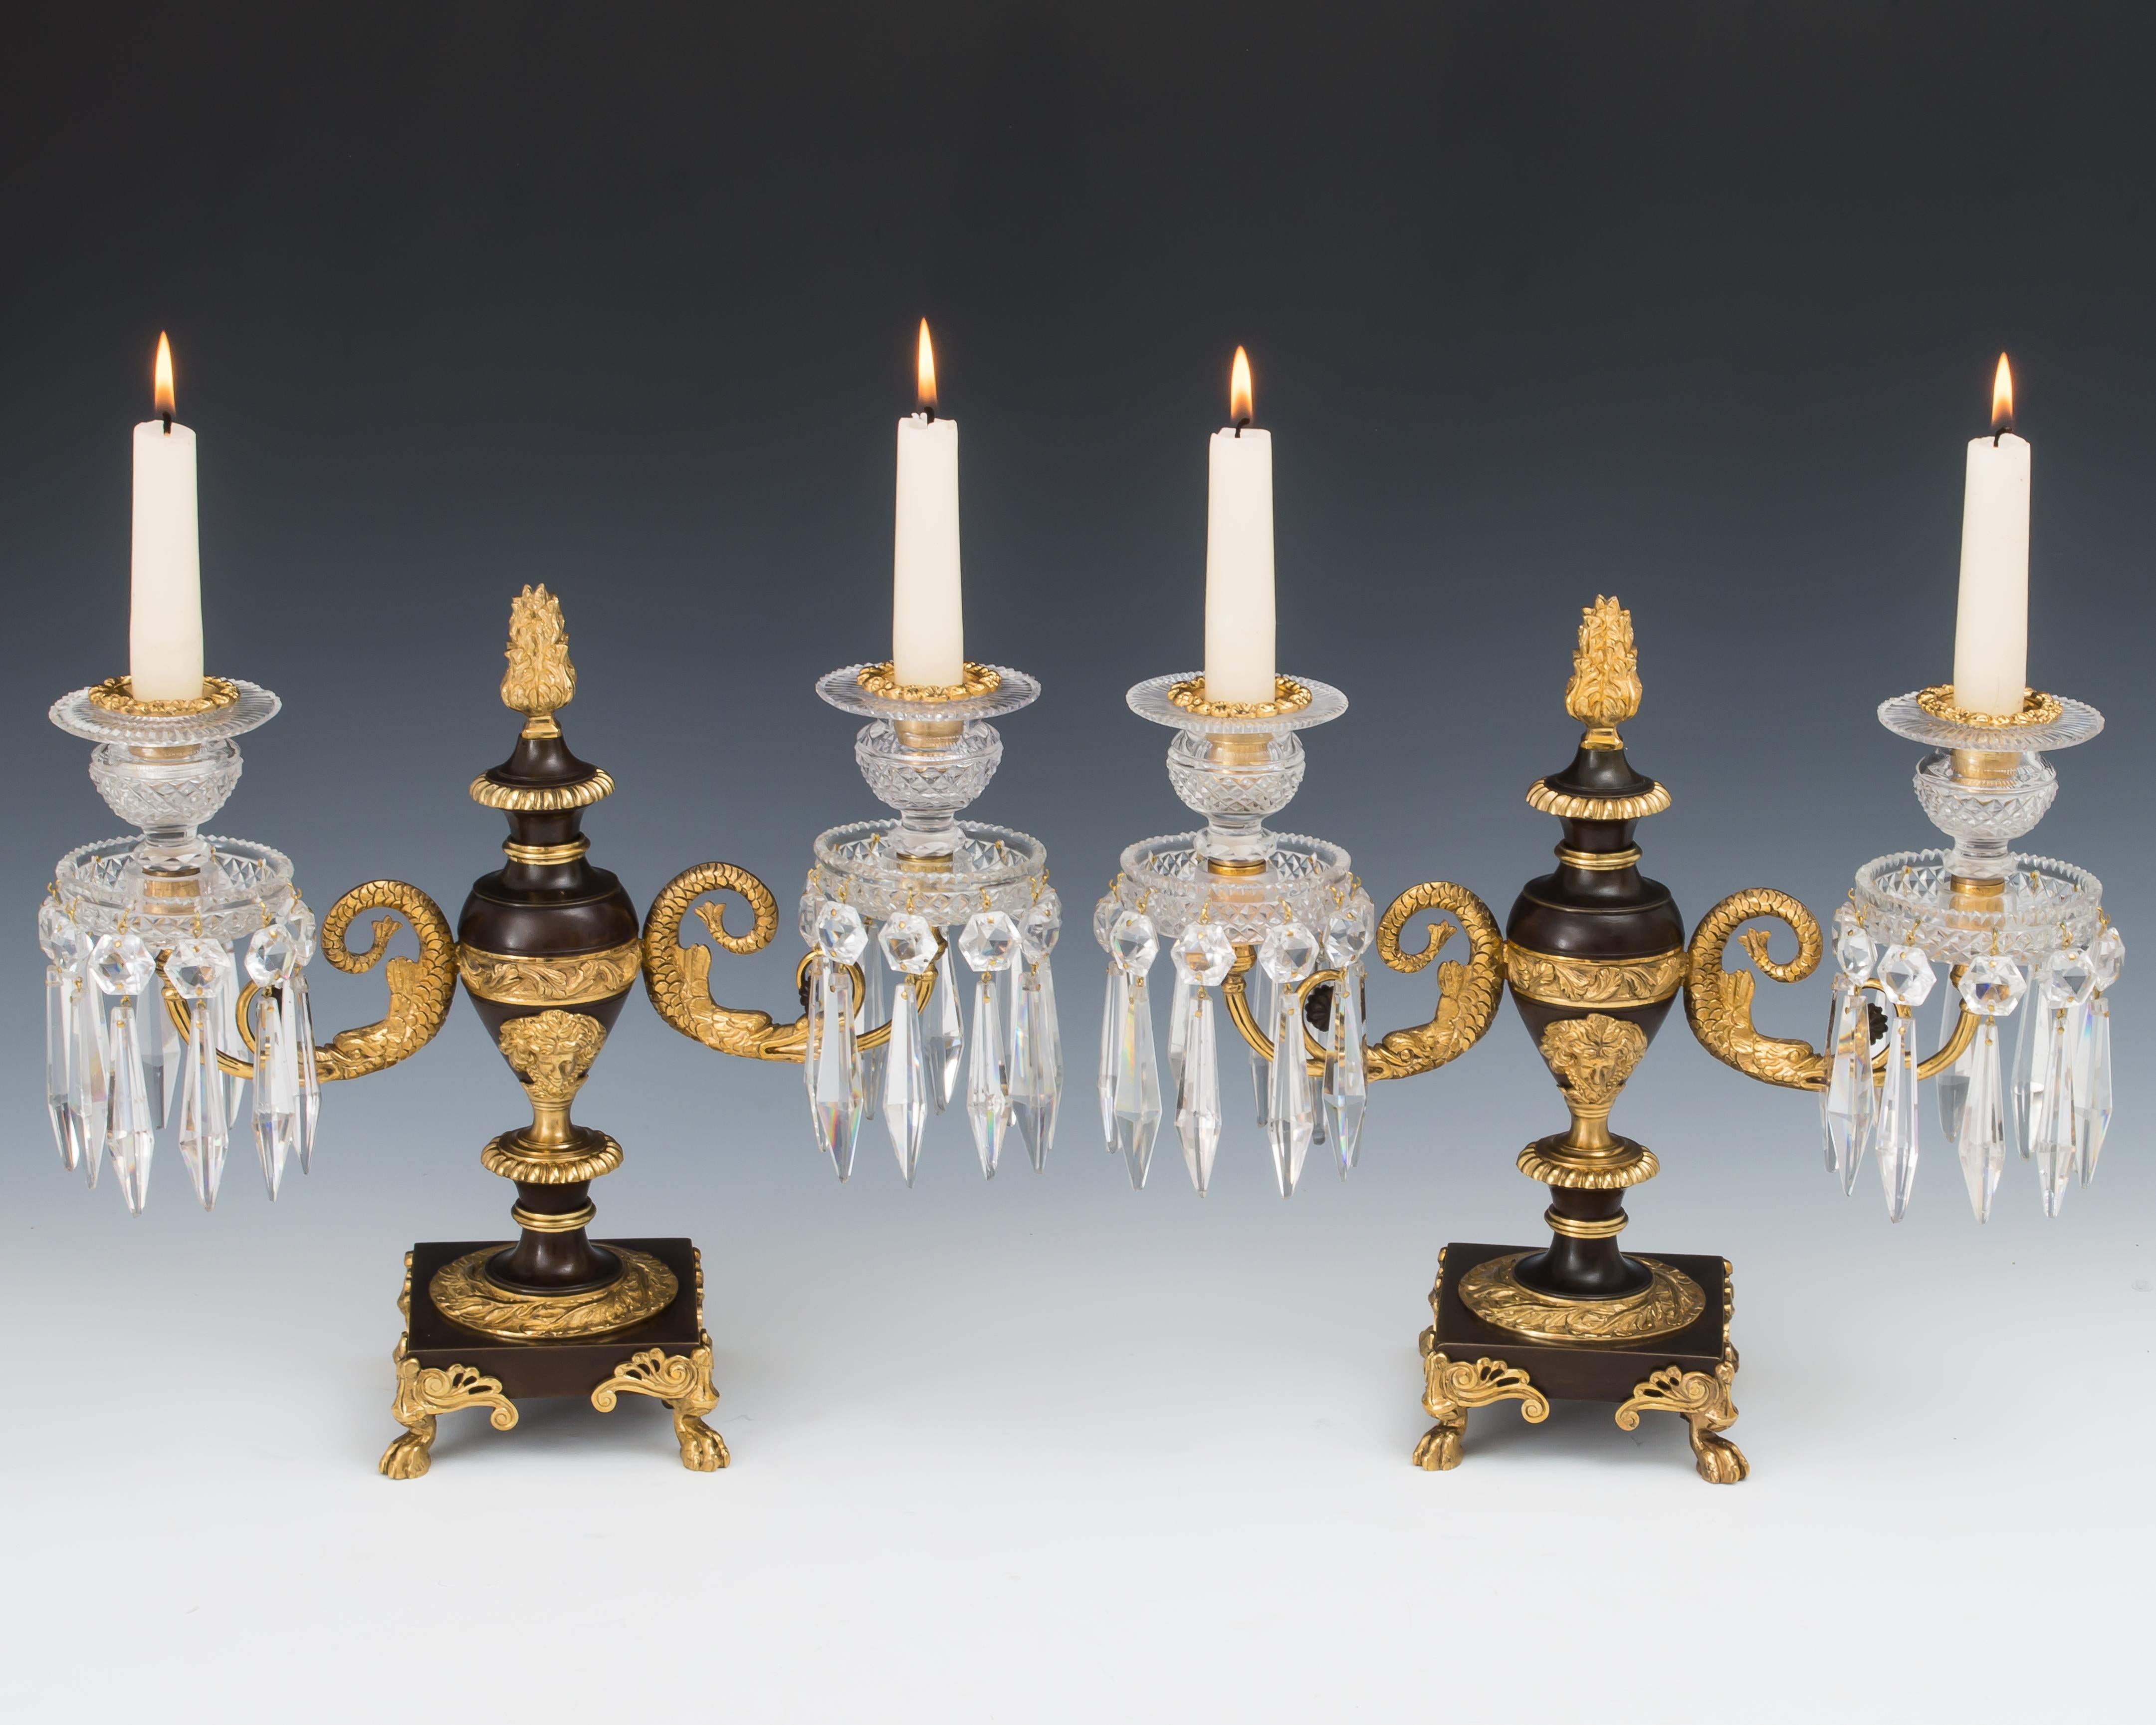 Pair of Regency Ormolu and Bronze Candelabra In Good Condition For Sale In Steyning, West sussex